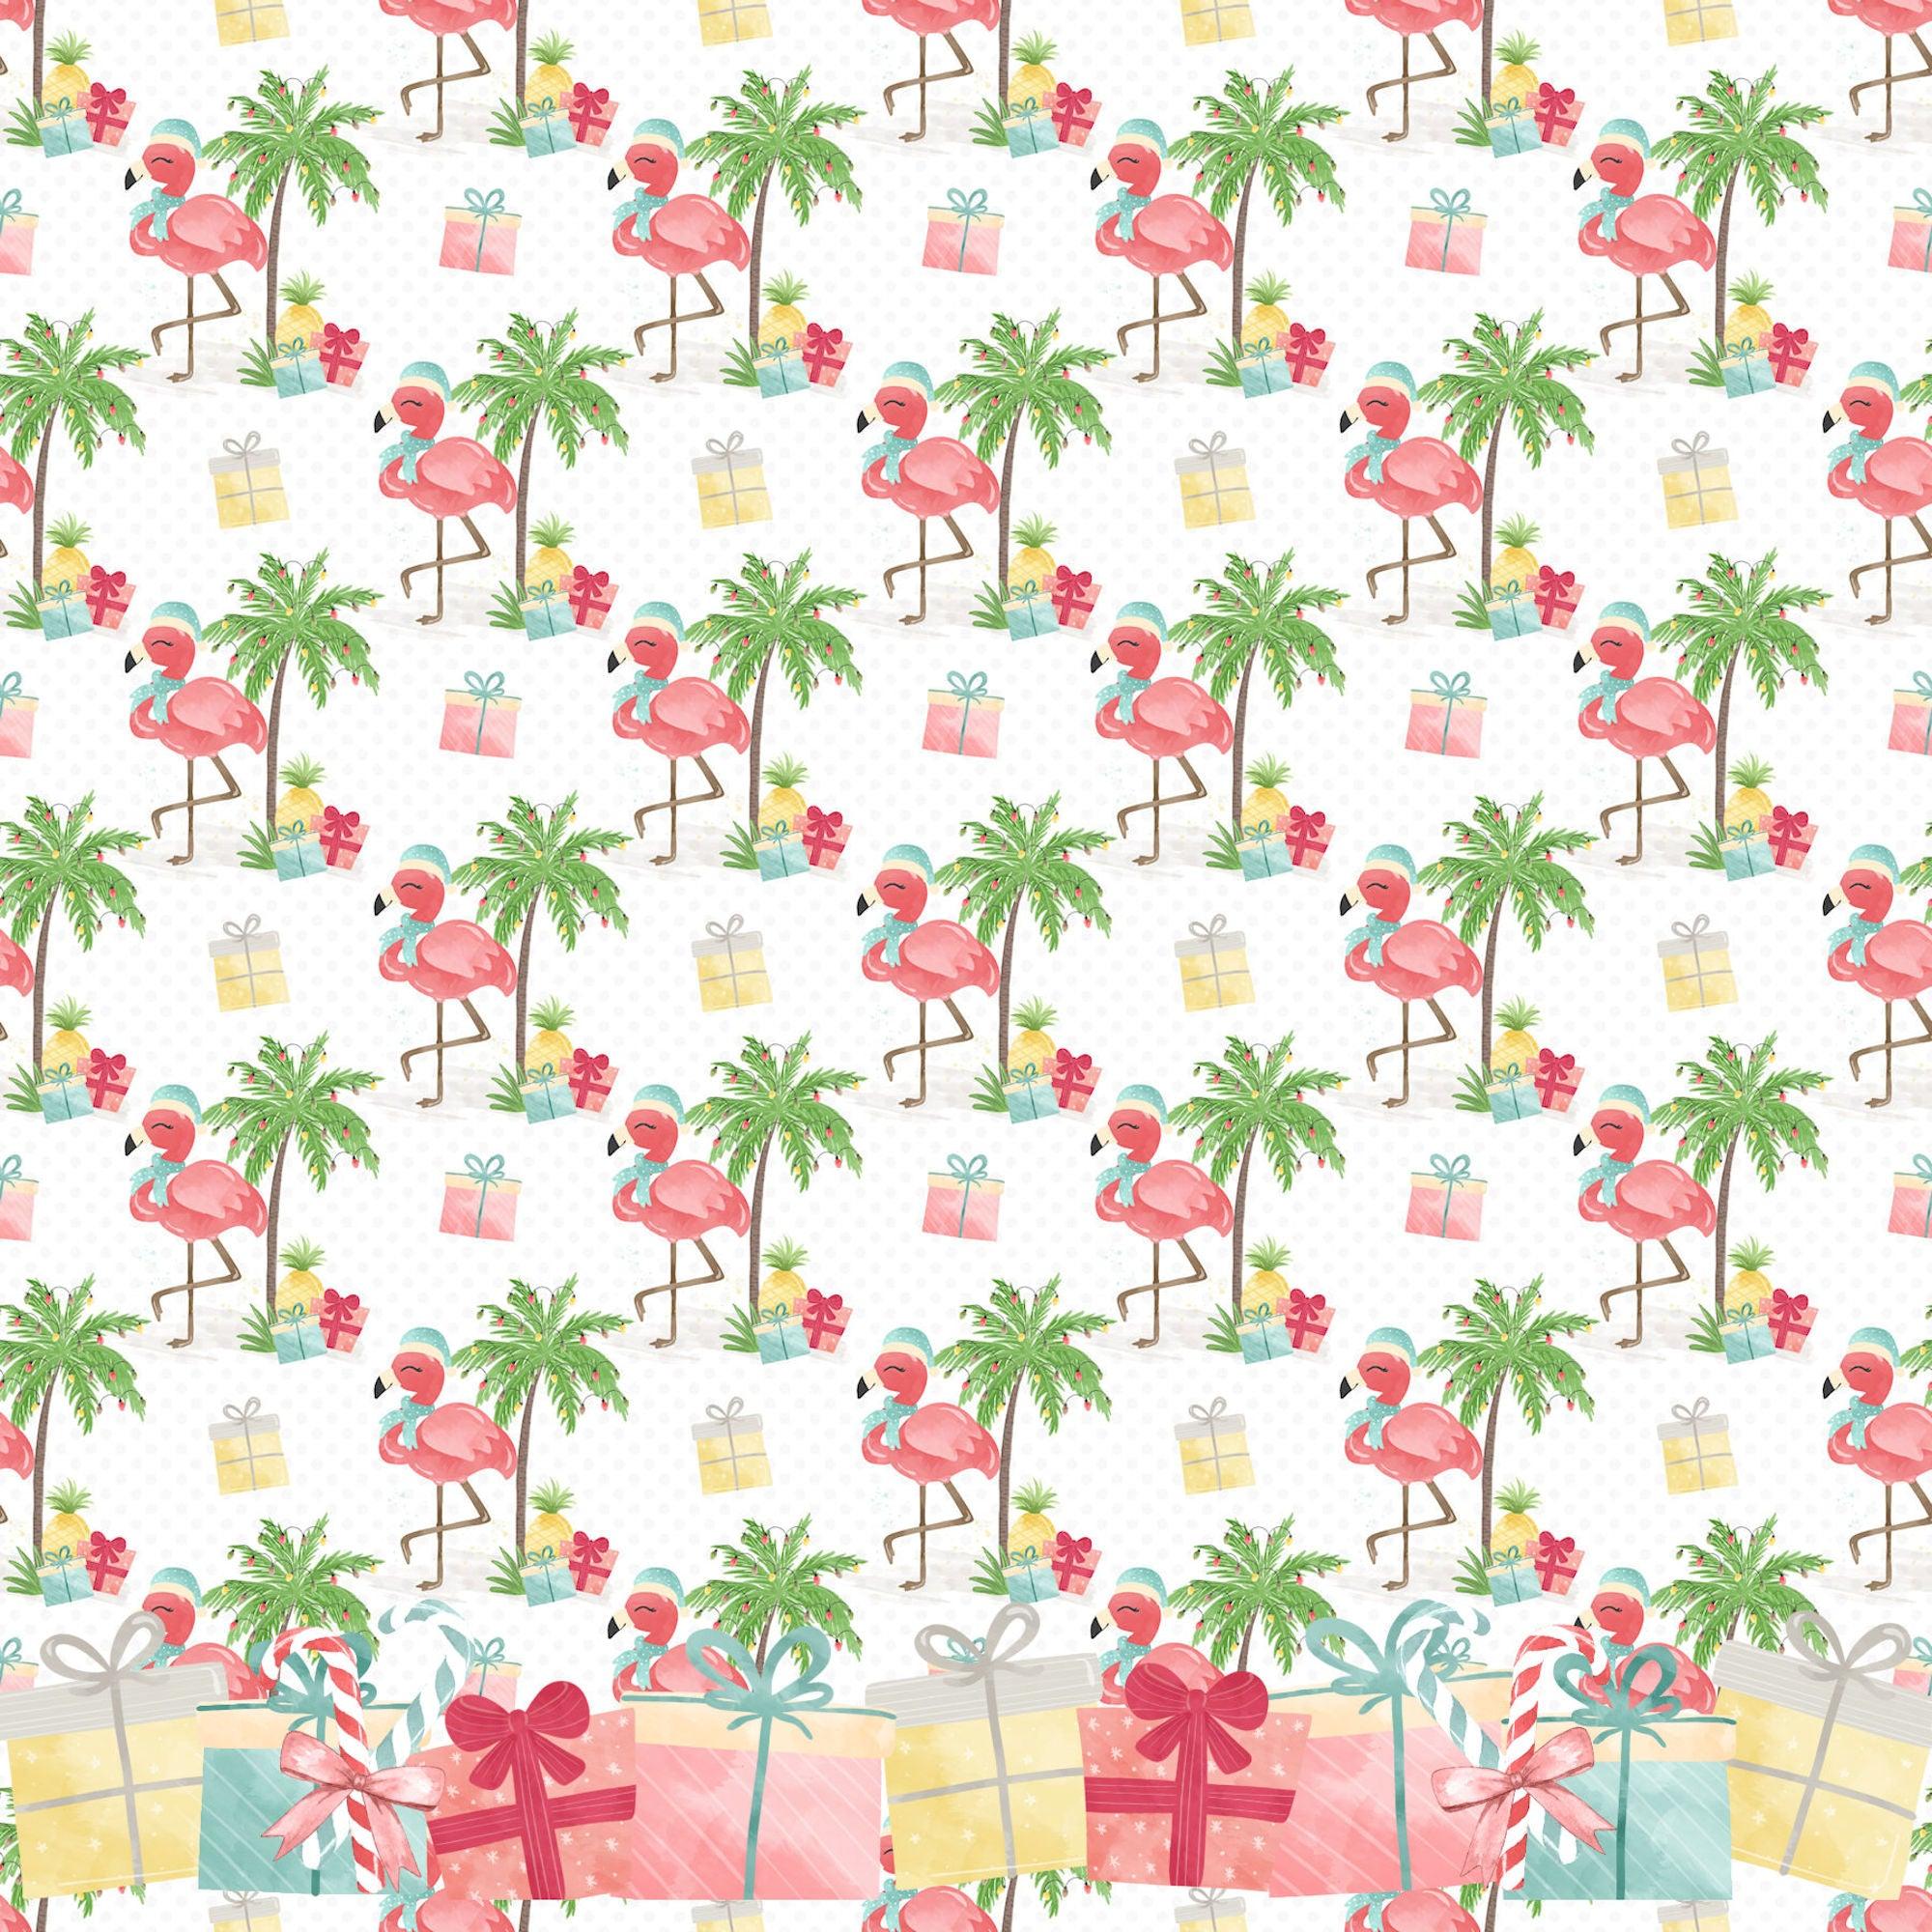 Flamingo Christmas Collection Flamingo Fun 12 x 12 Double-Sided Scrapbook Paper by SSC Designs - Scrapbook Supply Companies